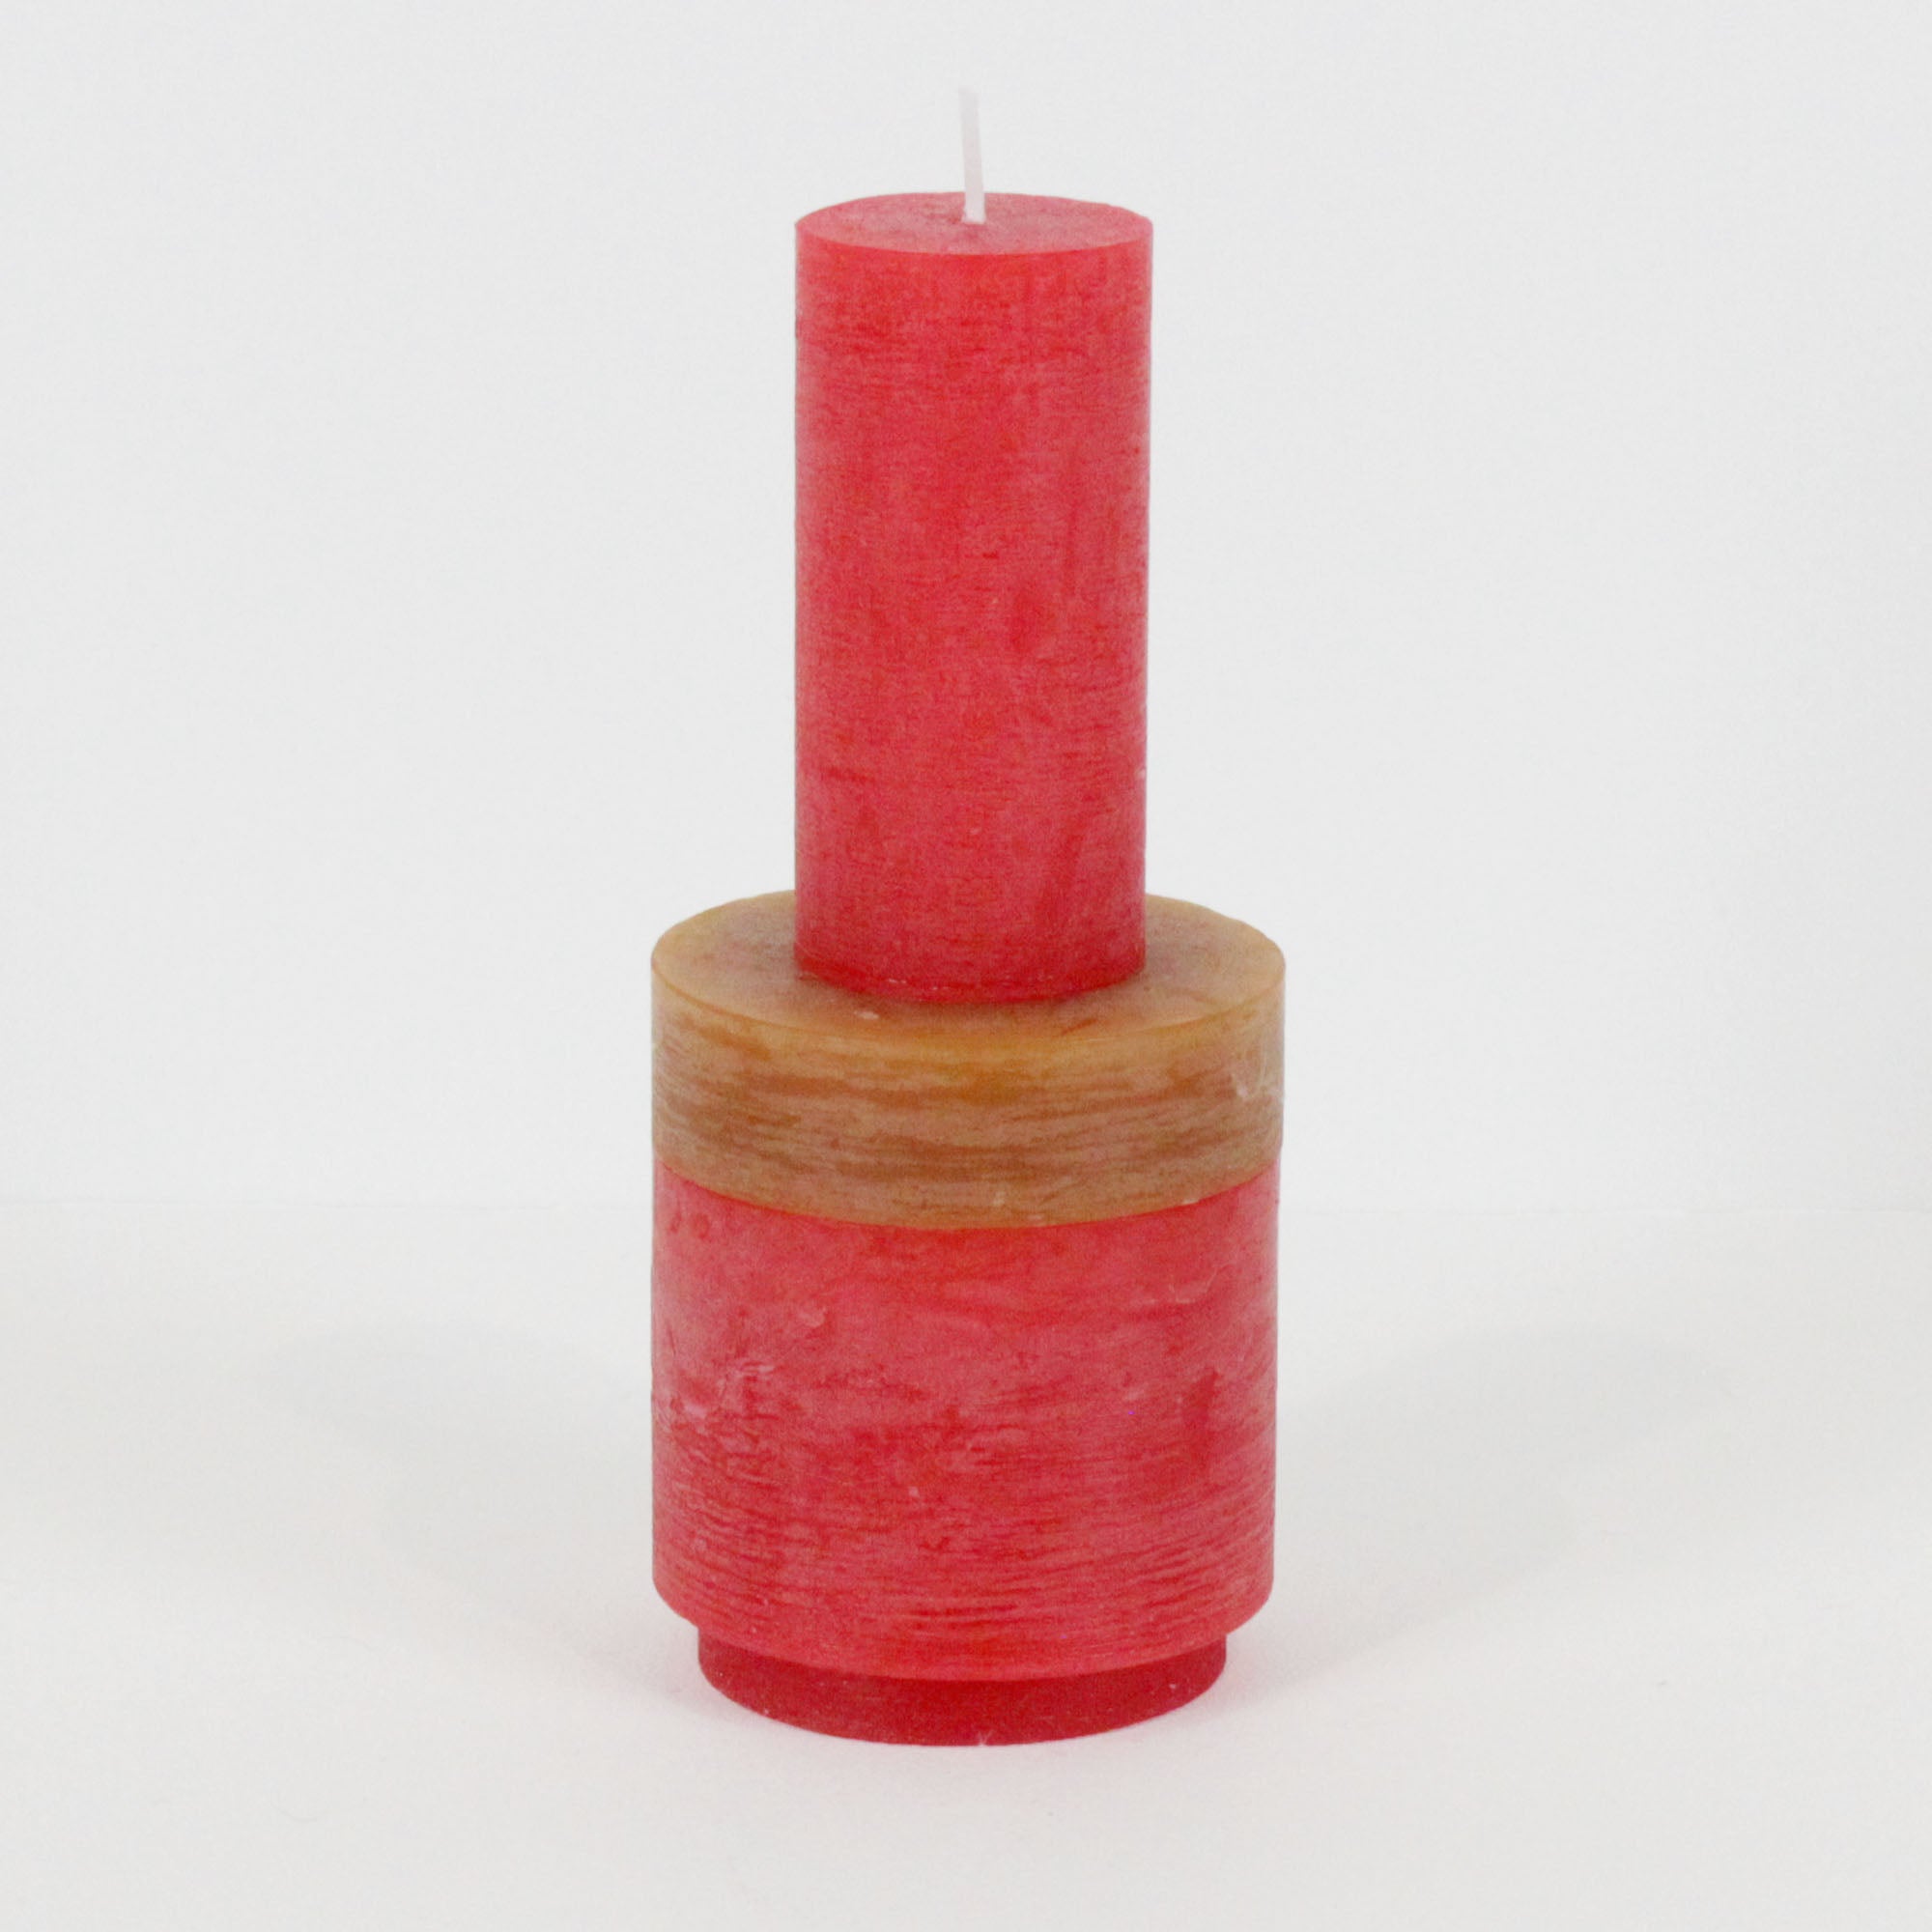 Candle Stack 02 (Red)